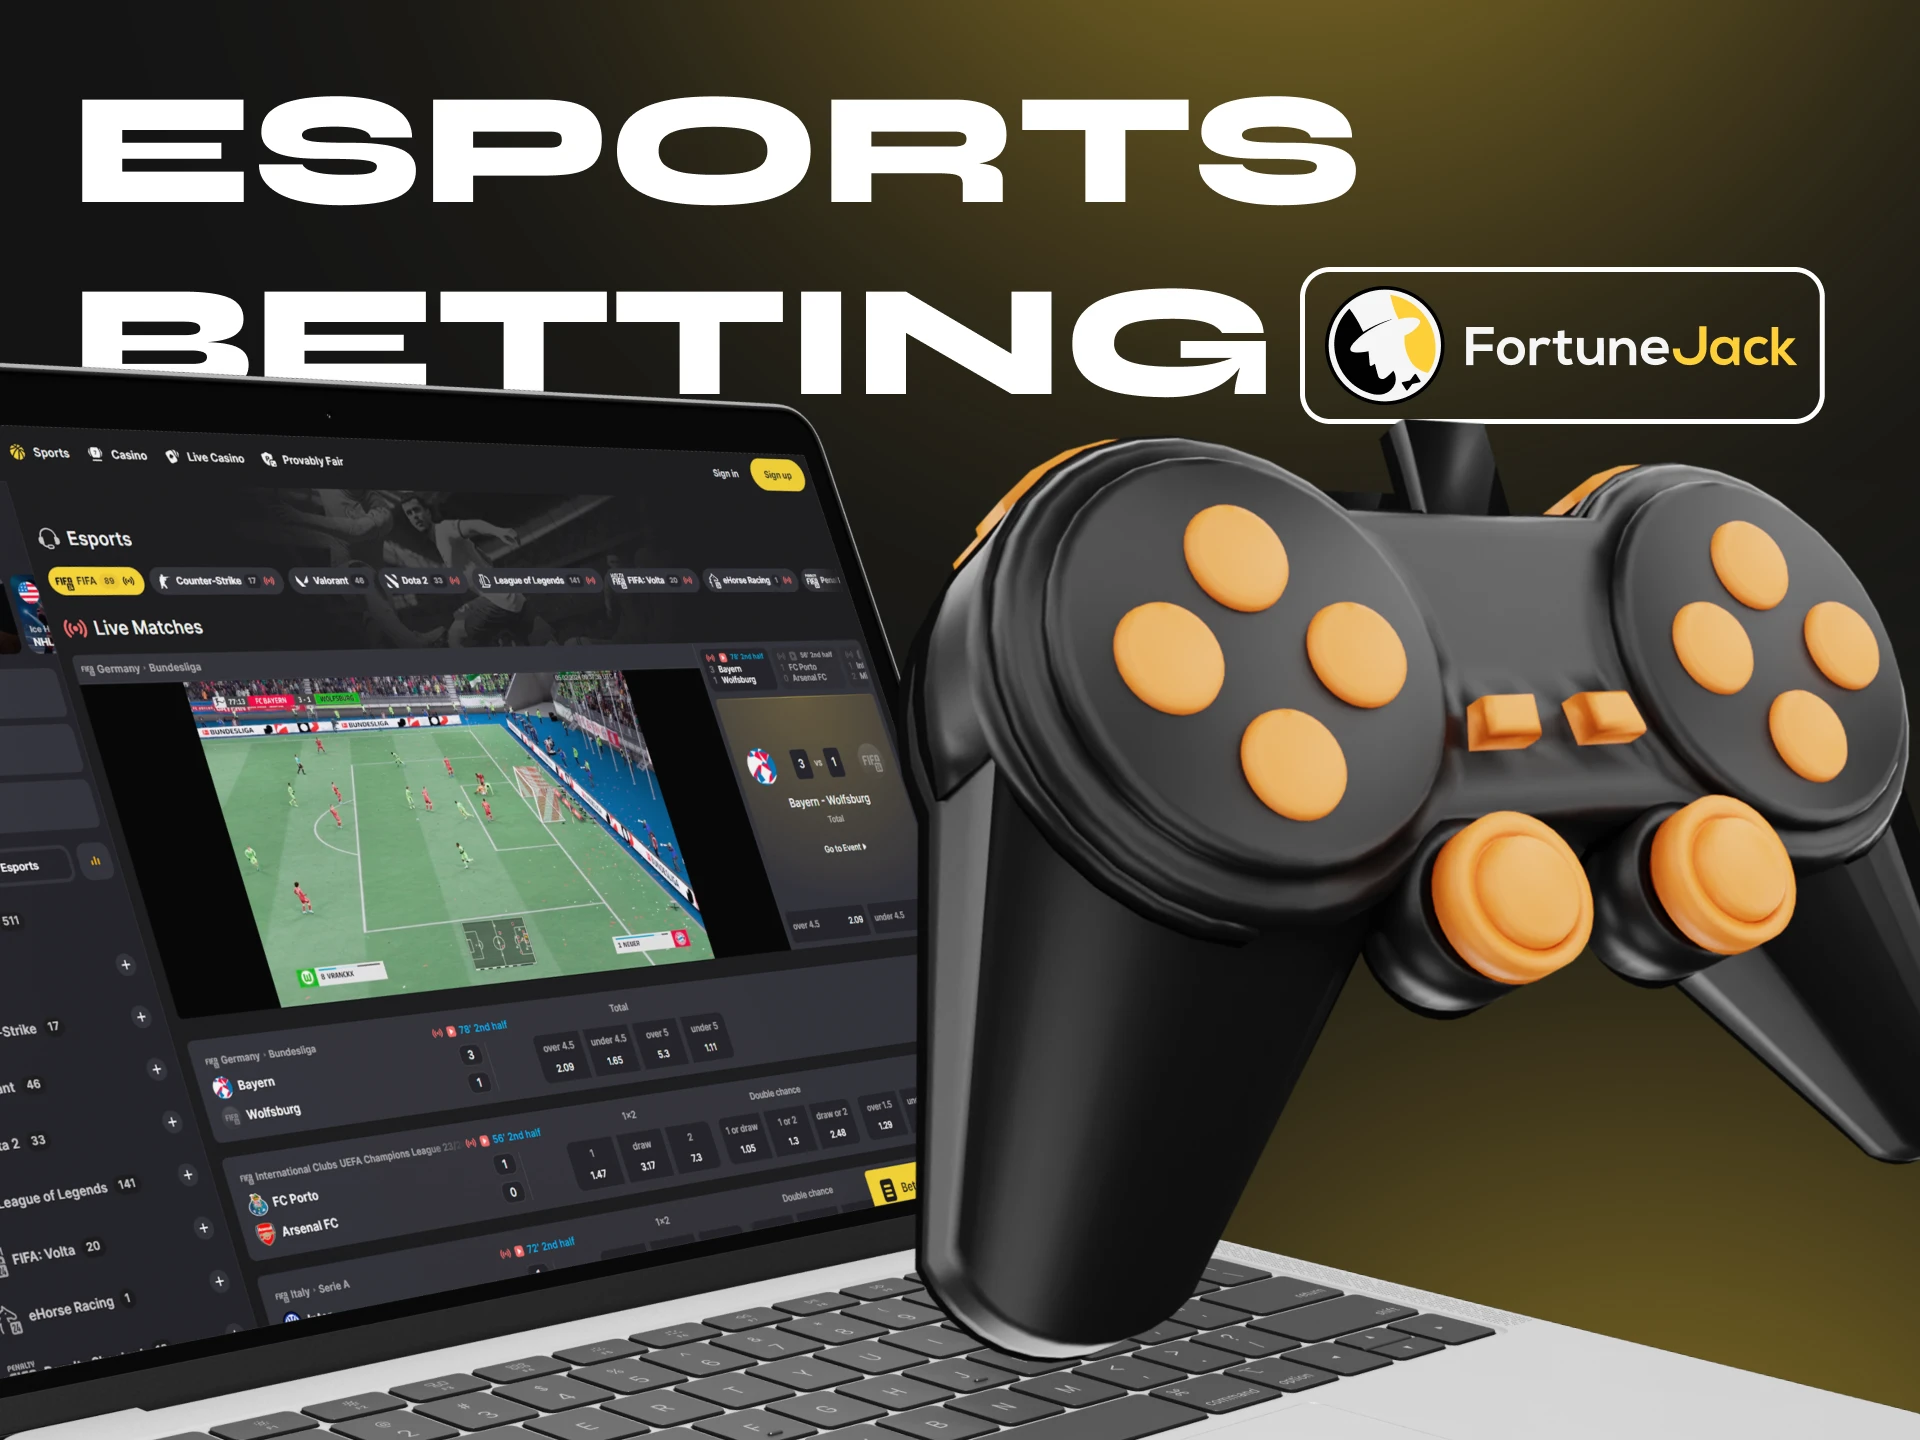 FortuneJack offers a wide eSports betting section.